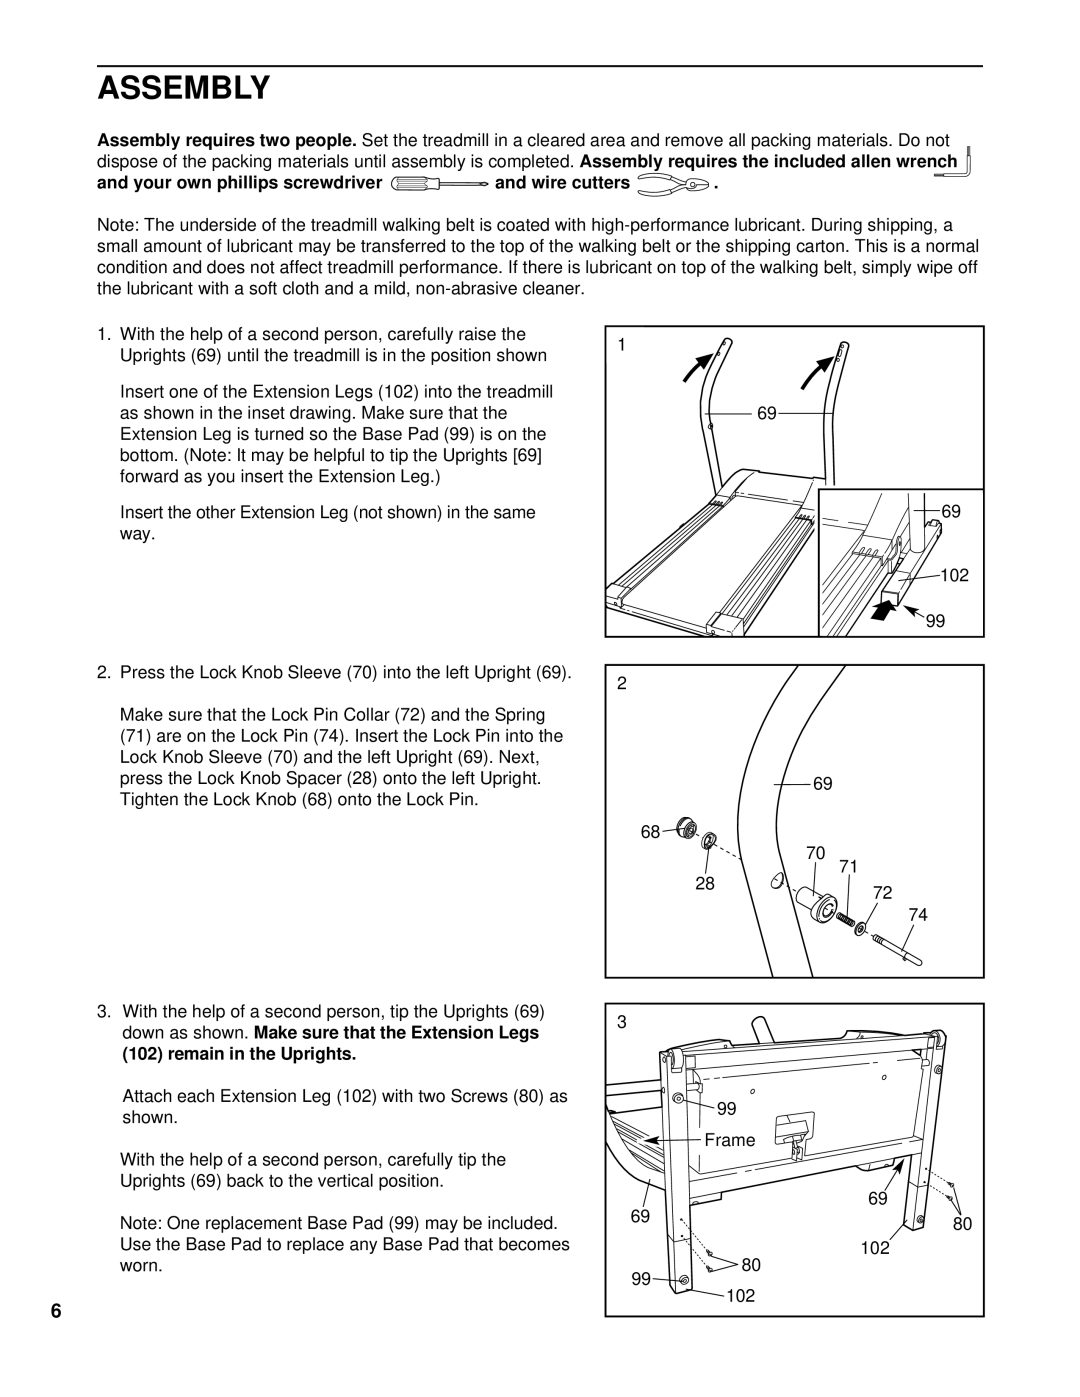 NordicTrack NTTL11994 user manual Assembly, Your own phillips screwdriver and wire cutters 